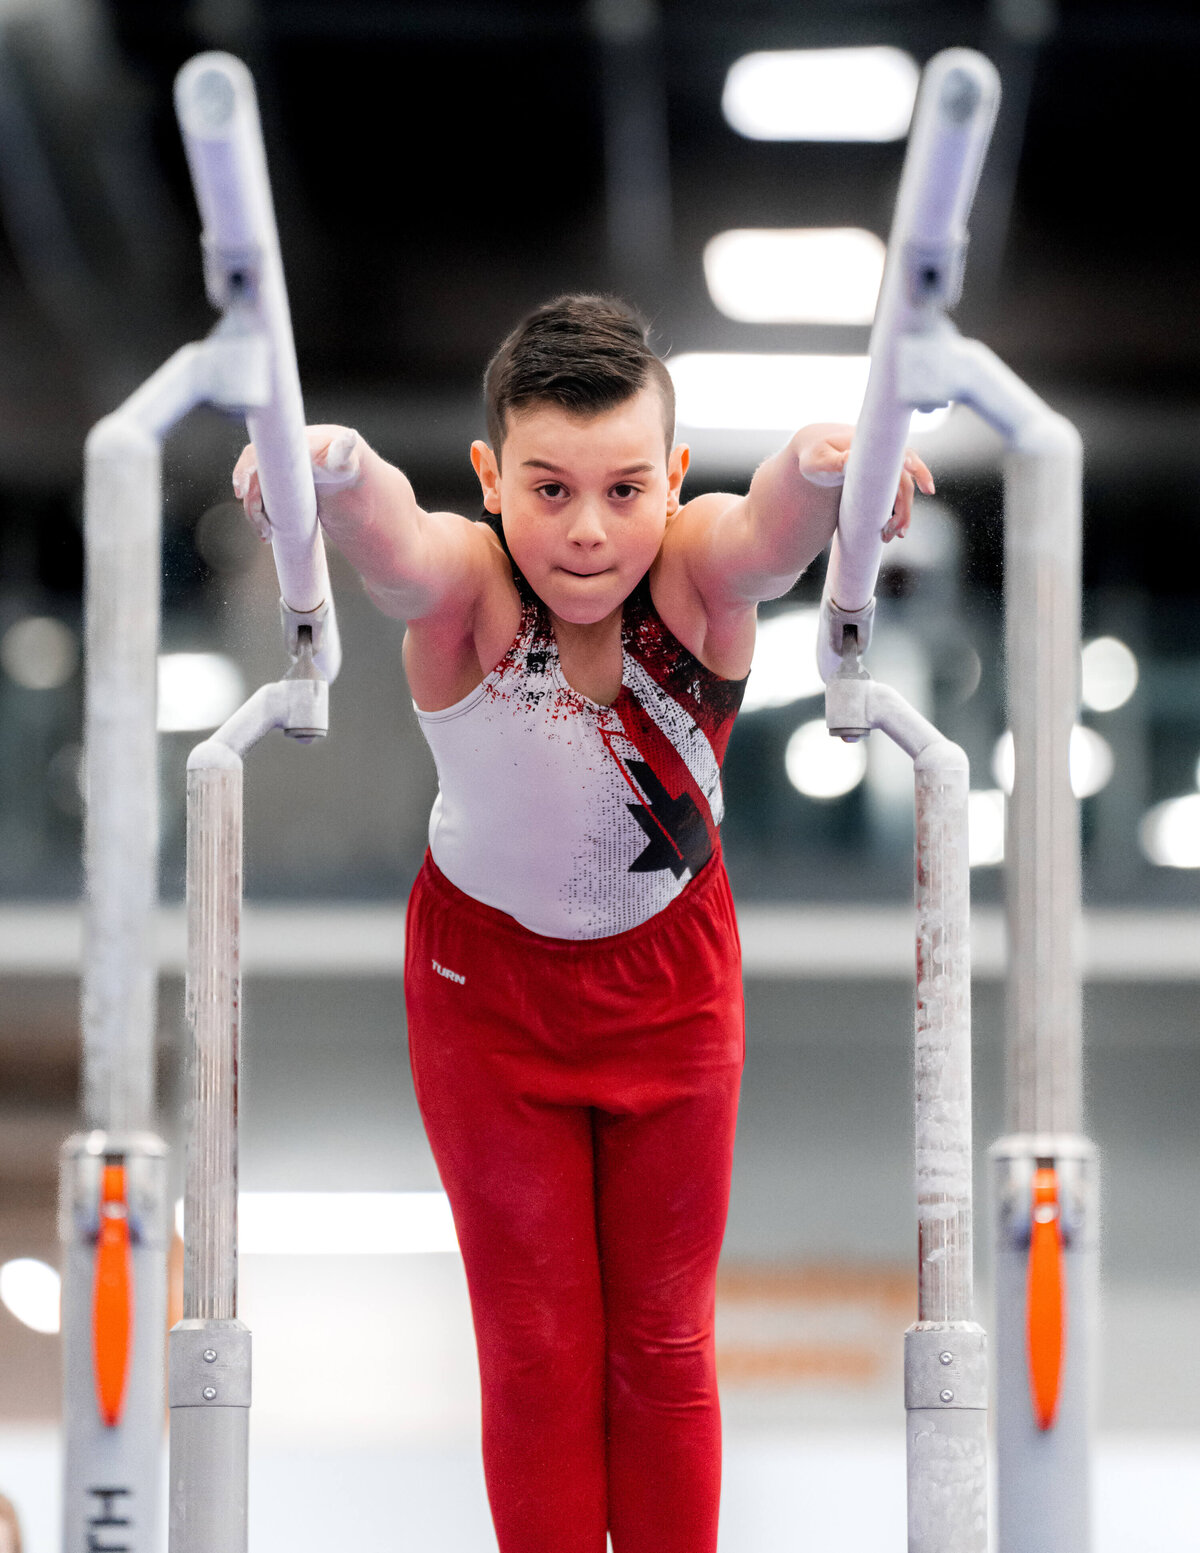 Photo by Luke O'Geil taken at the 2023 inaugural Grizzly Classic men's artistic gymnastics competitionA1_00845